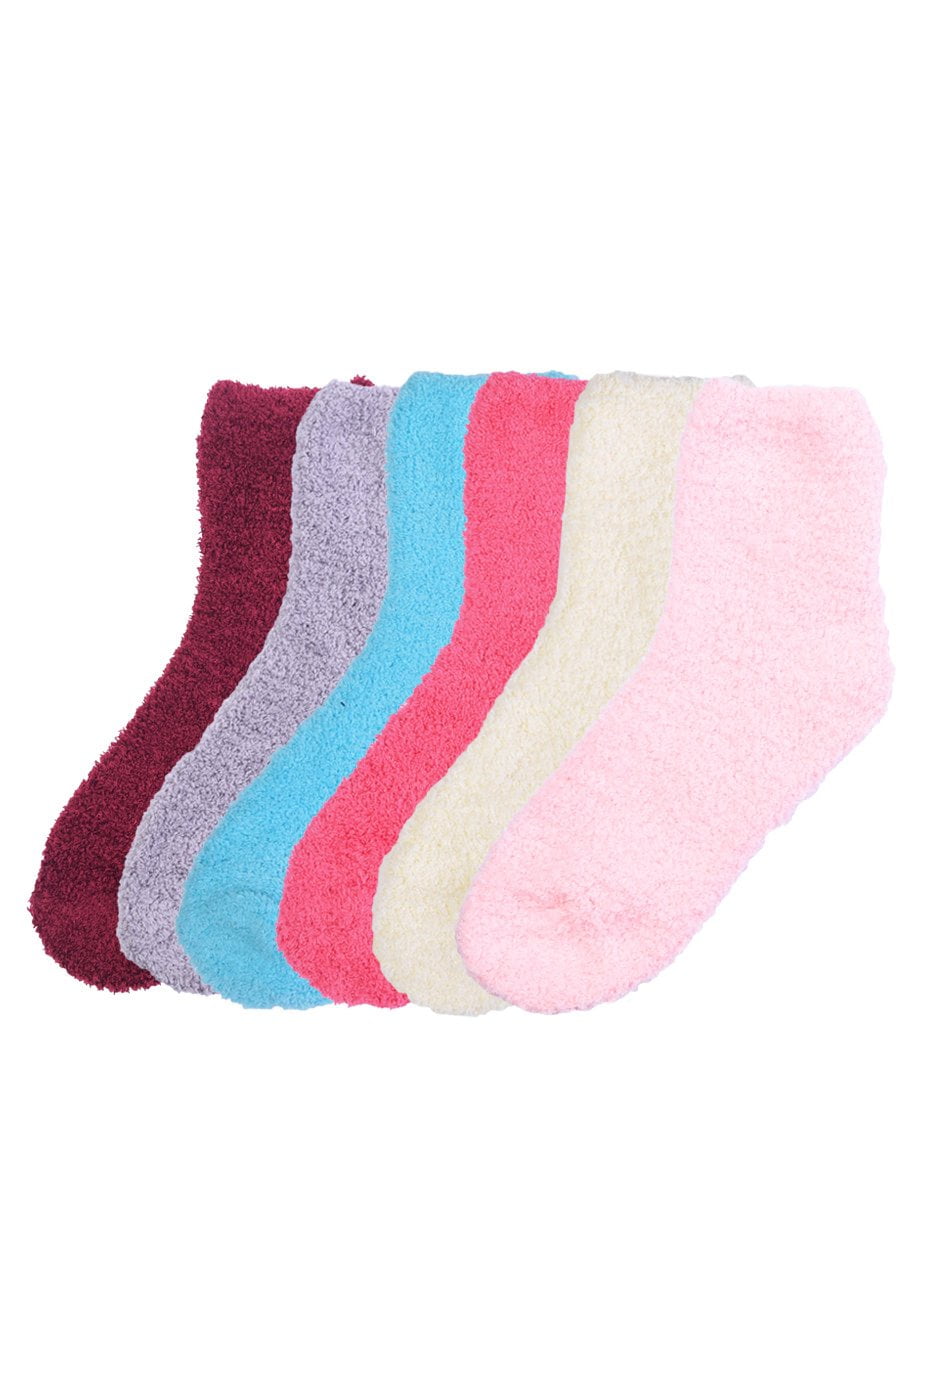 3 Pairs For Mens Soft Cozy Fuzzy Socks With Non-Skid Plain Solid Home Slipper 